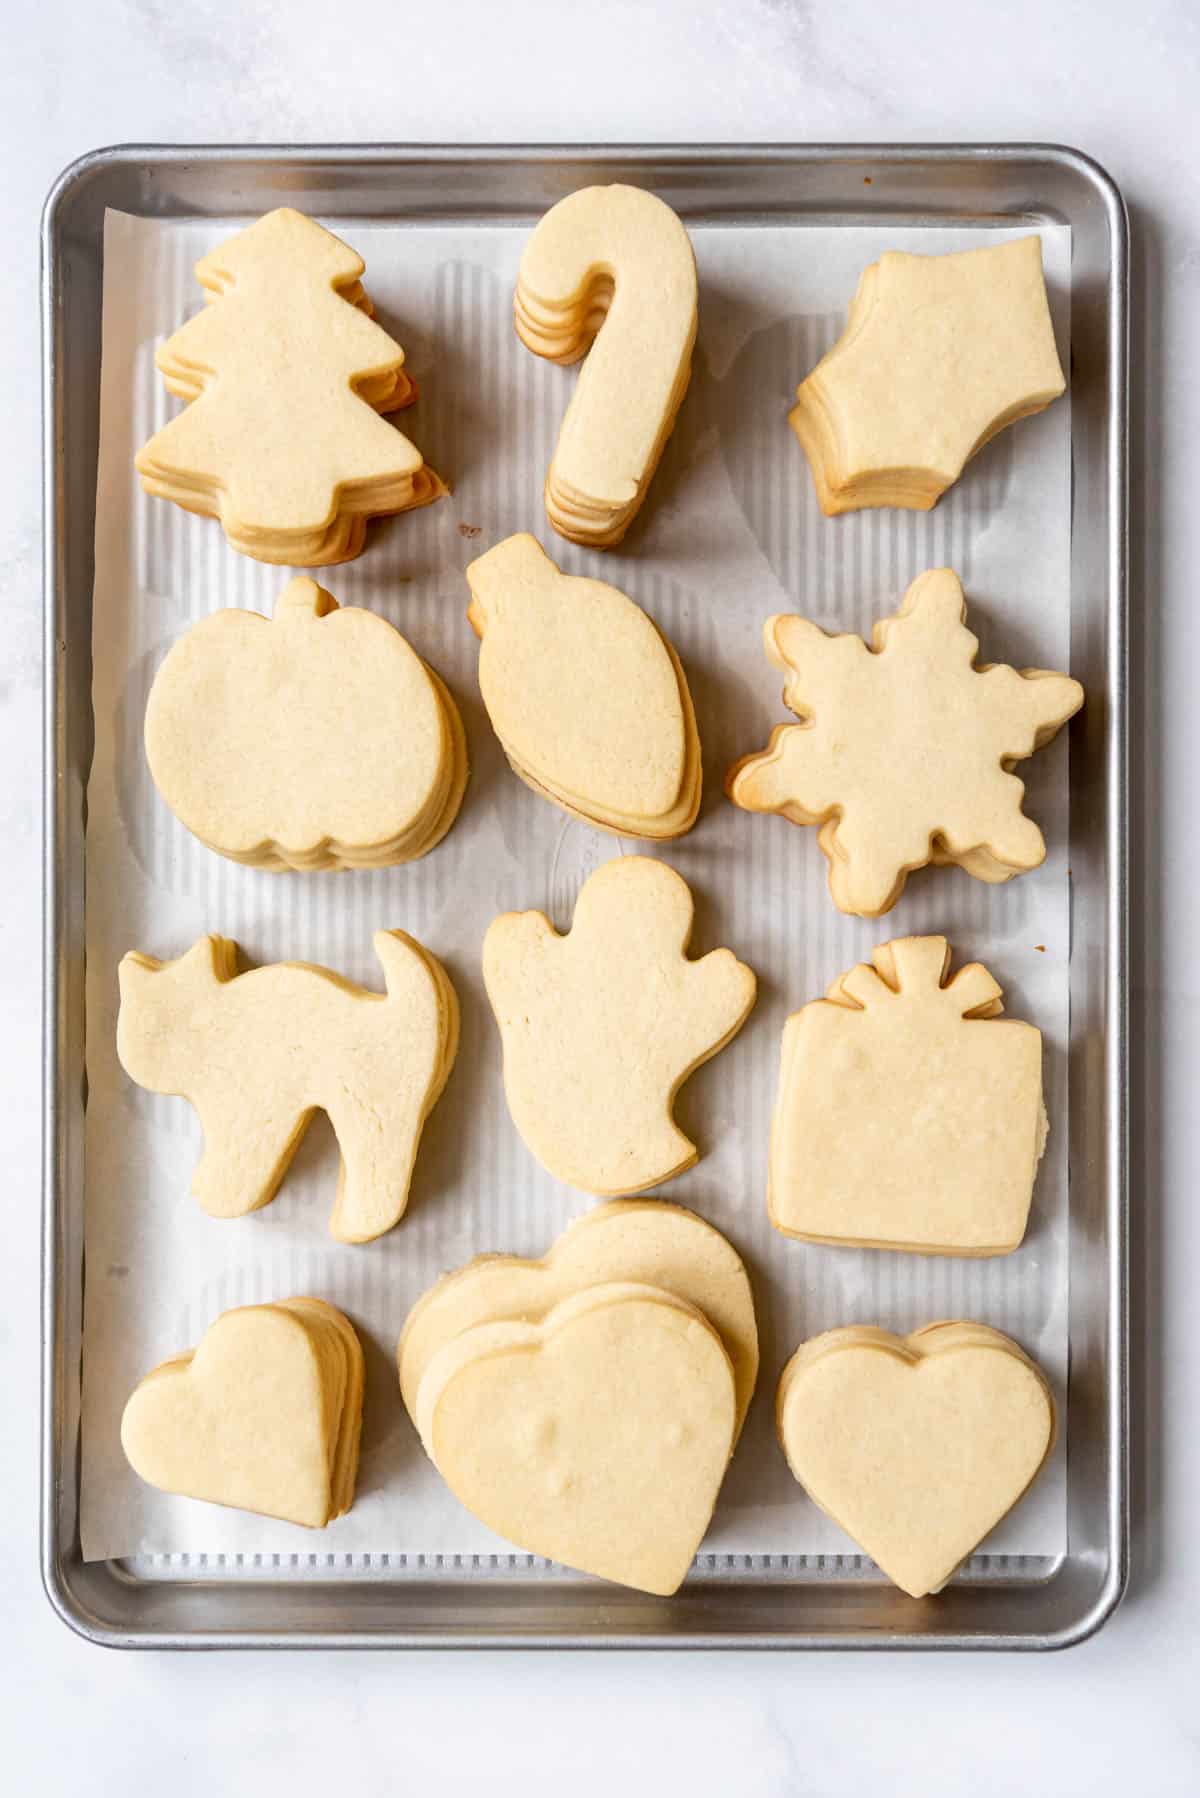 An overhead image of a baking sheet filled with stacks of unfrosted sugar cookies cut out in different holiday shapes.